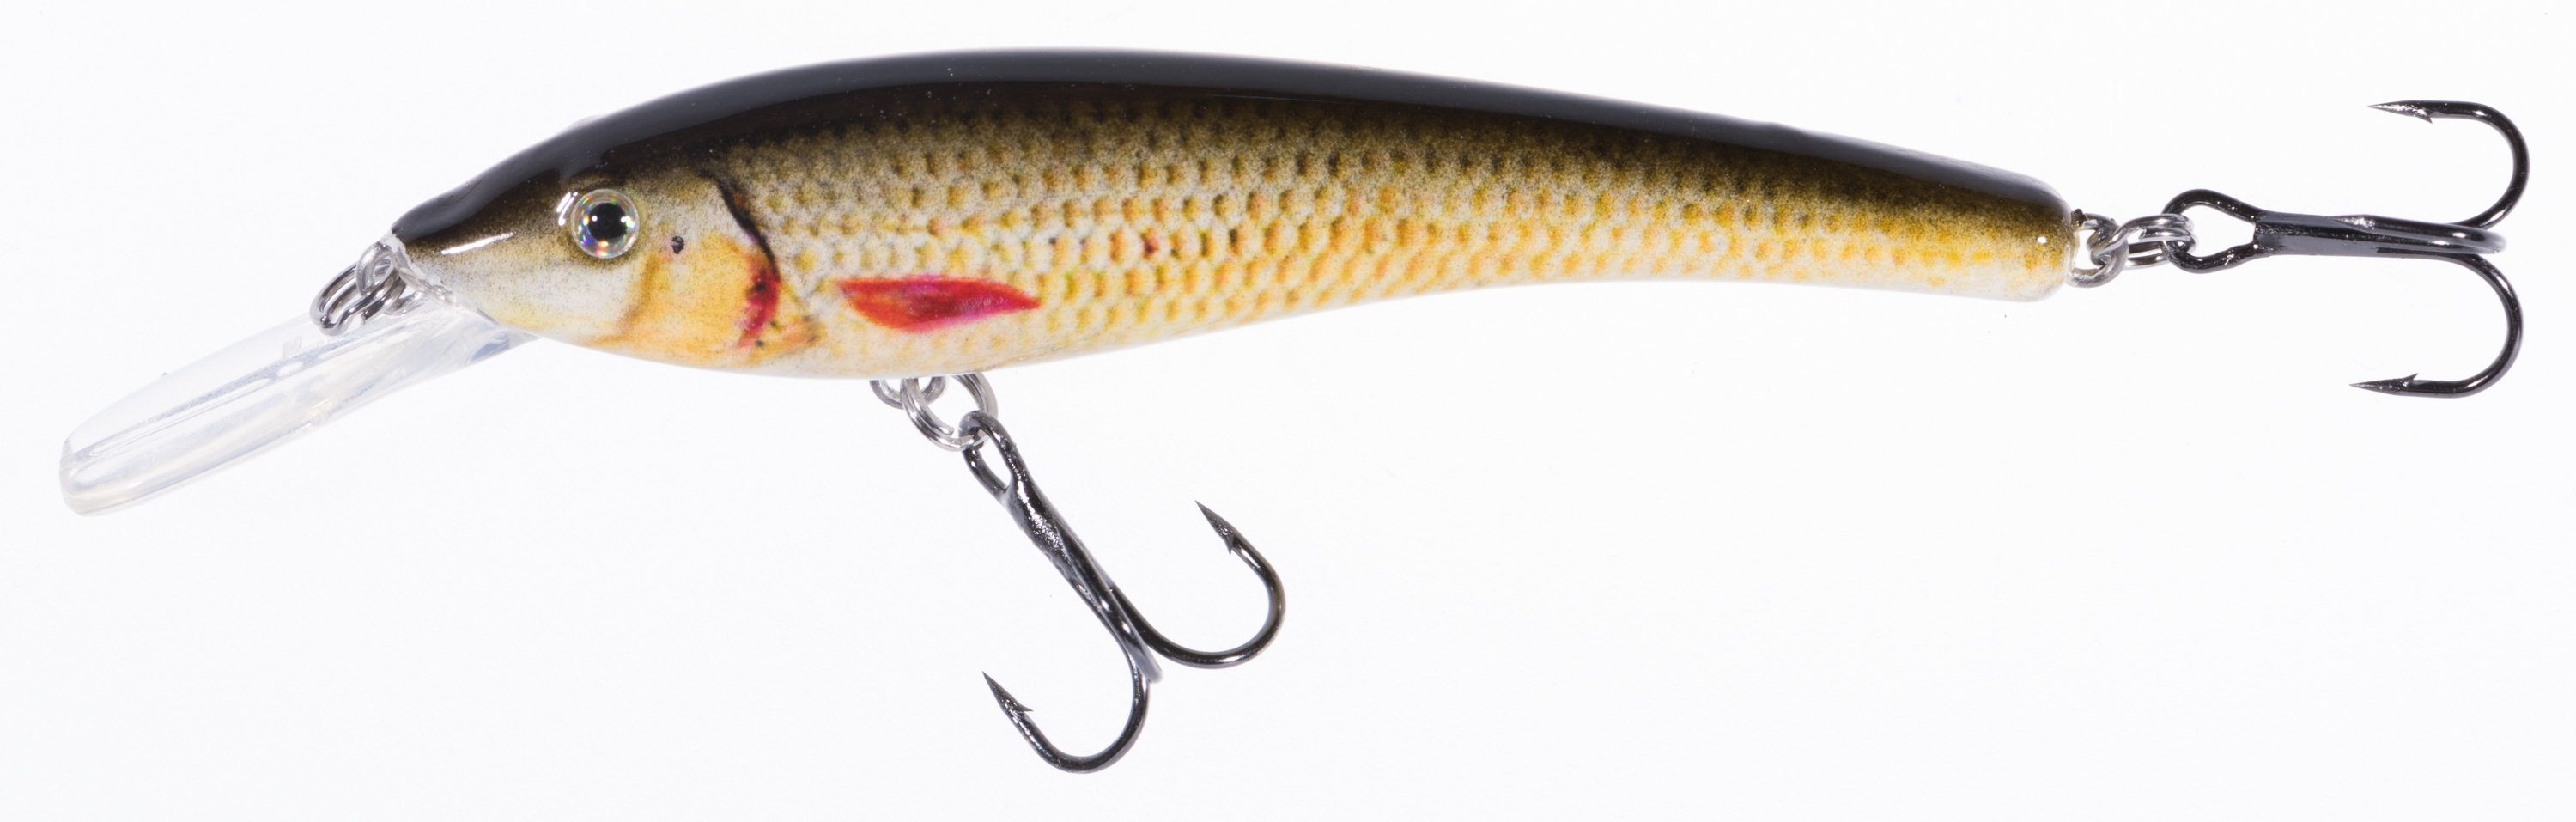 ATRACT SHAD LURES 6,0cm S K